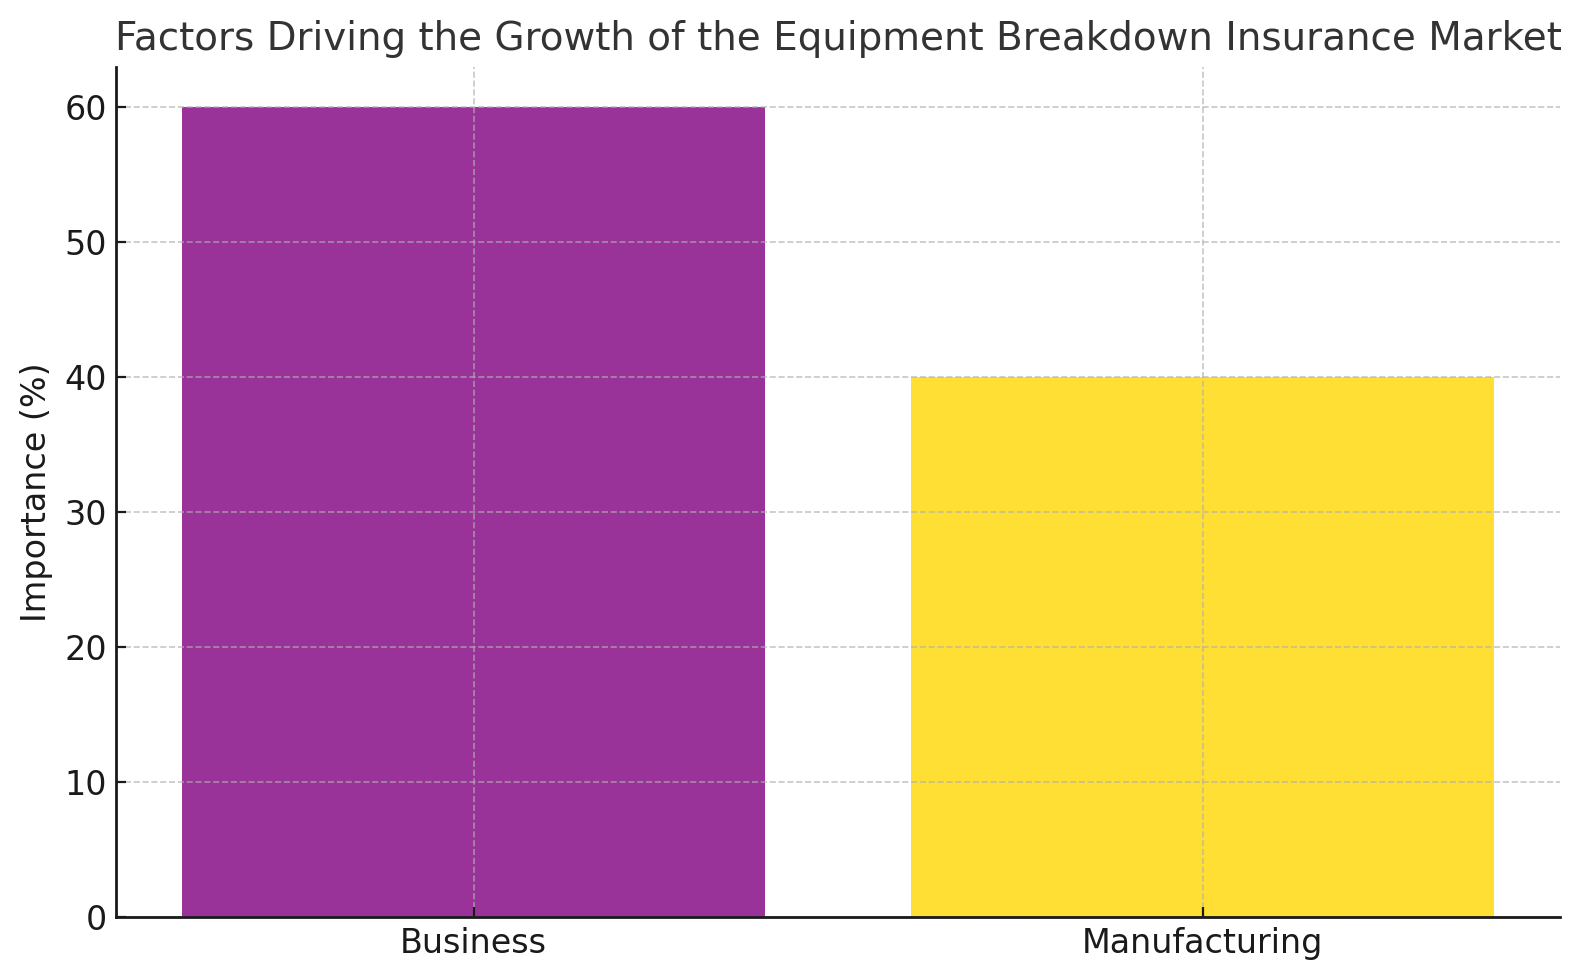 Bar Chart of Factors Driving the Growth of the Equipment Breakdown Insurance Market